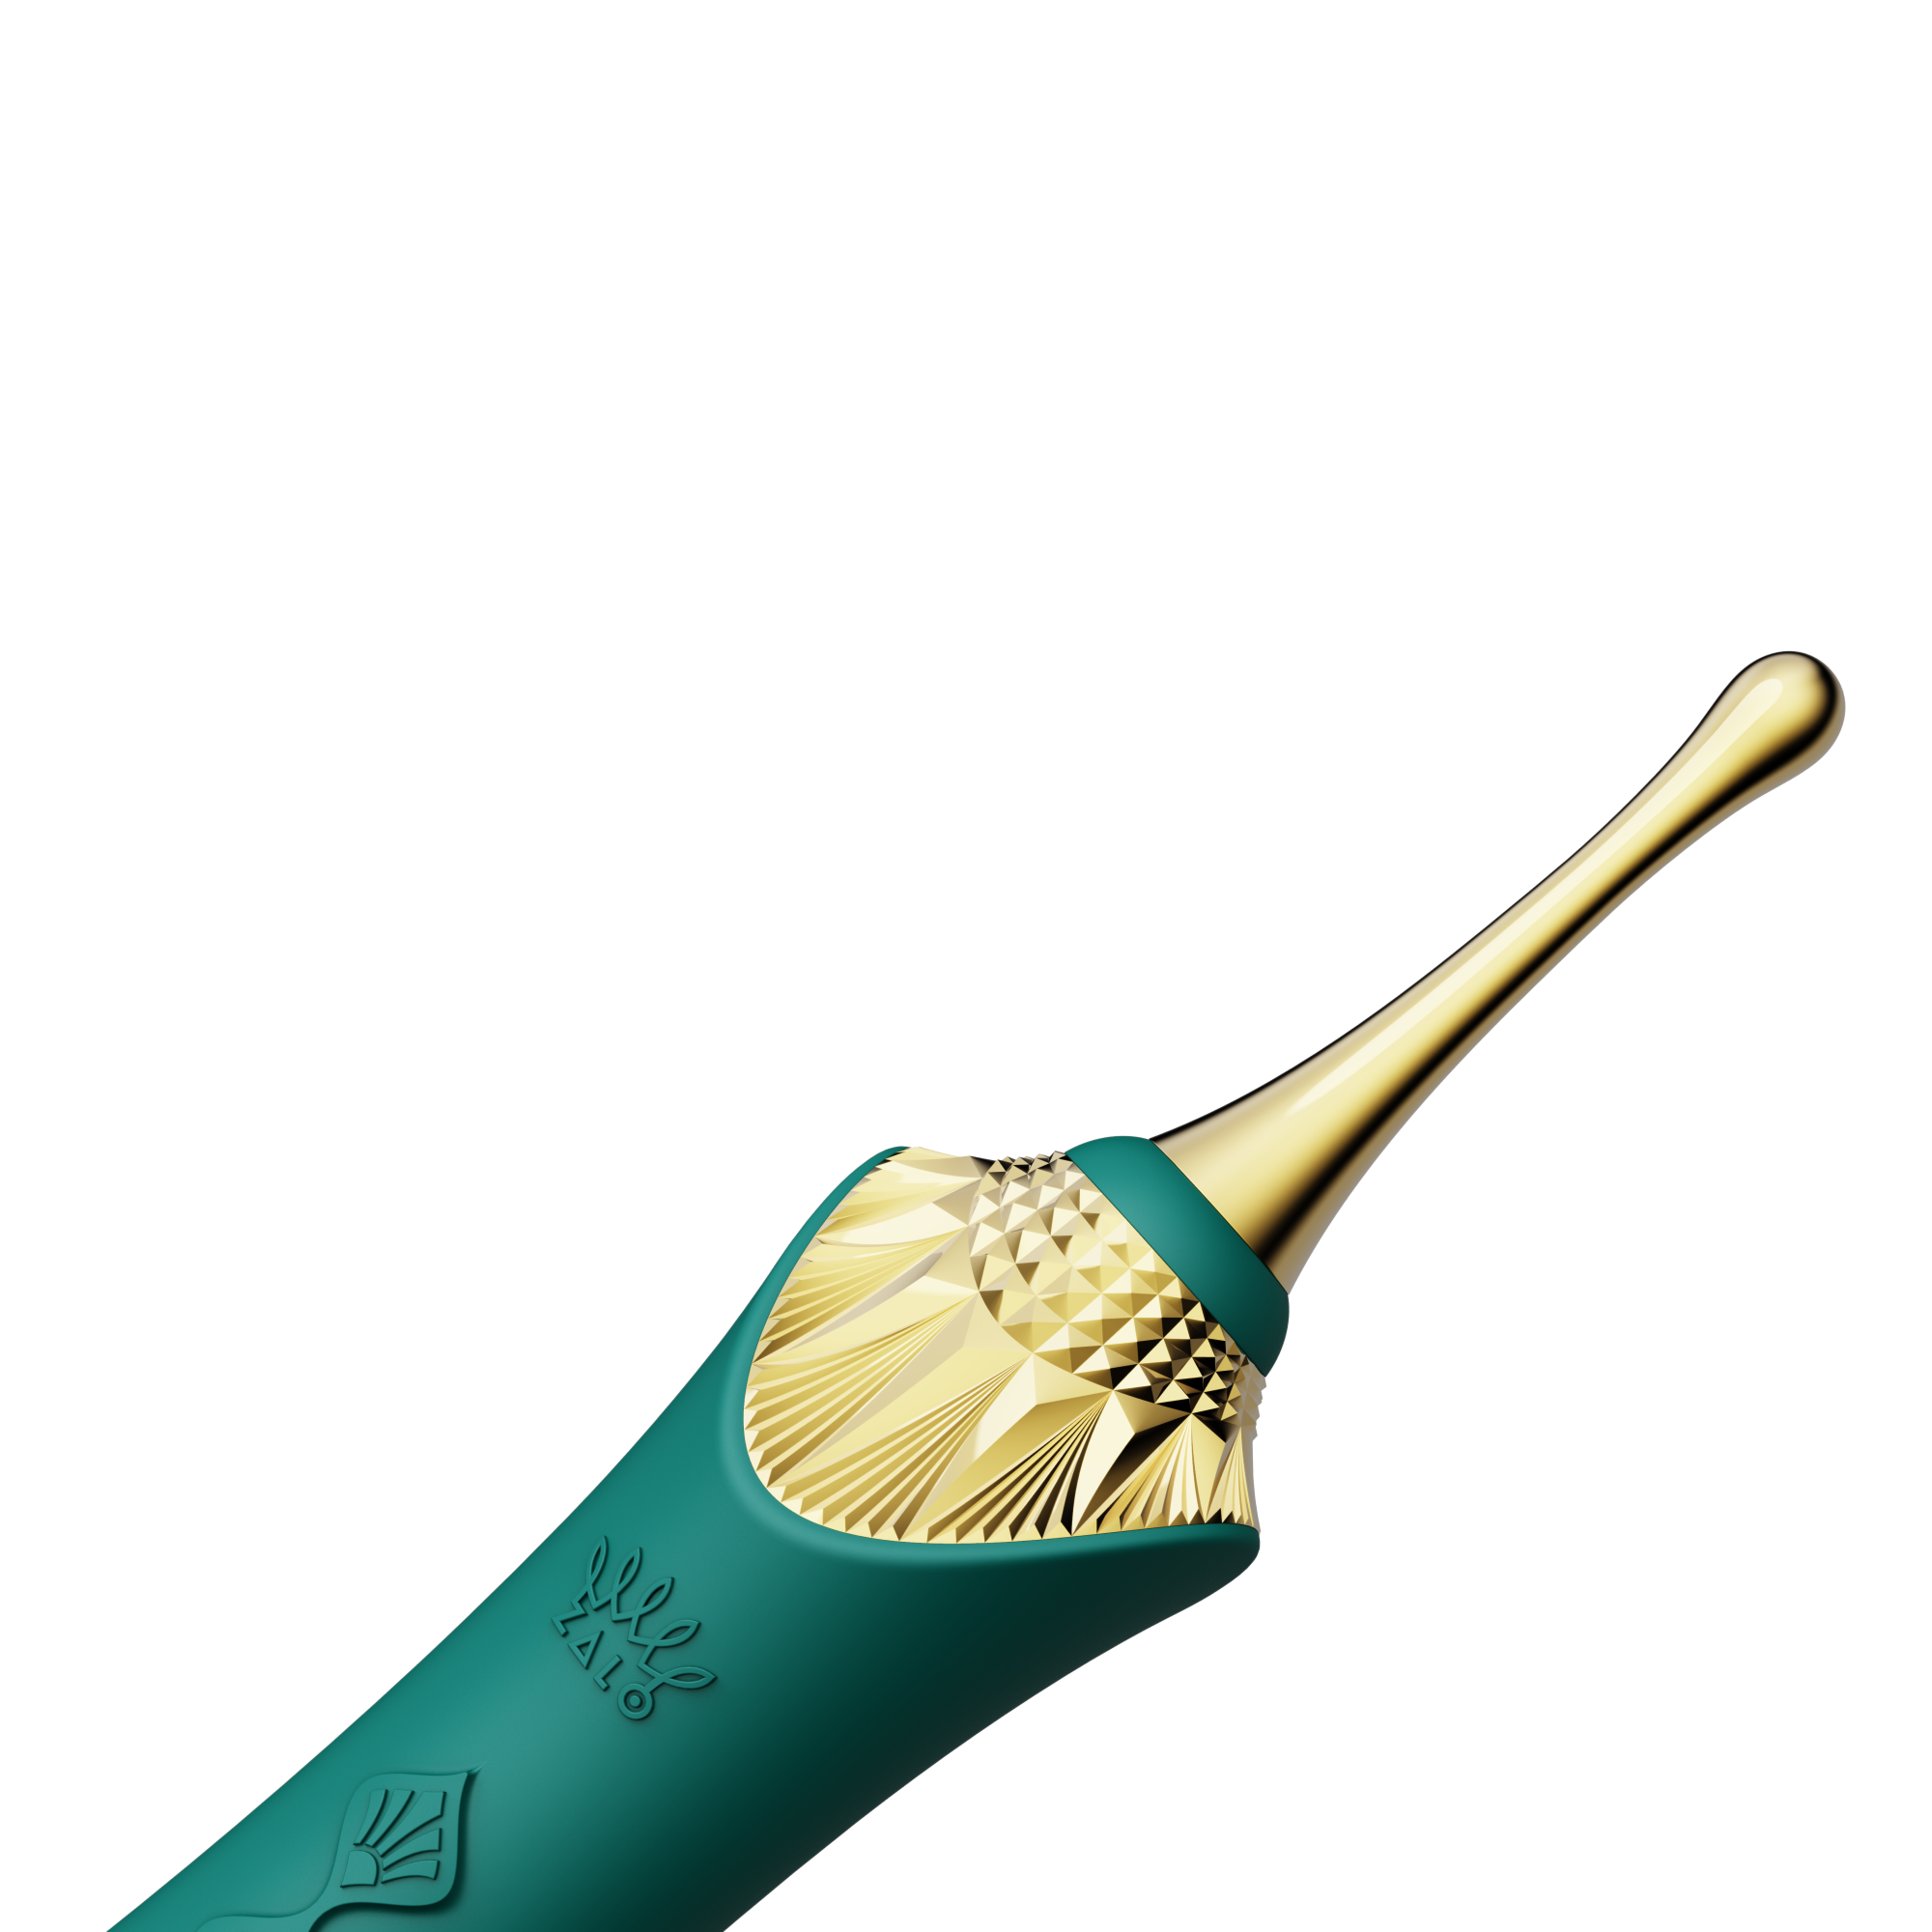 ZALO Bess Clitoral Massager Turquoise Green